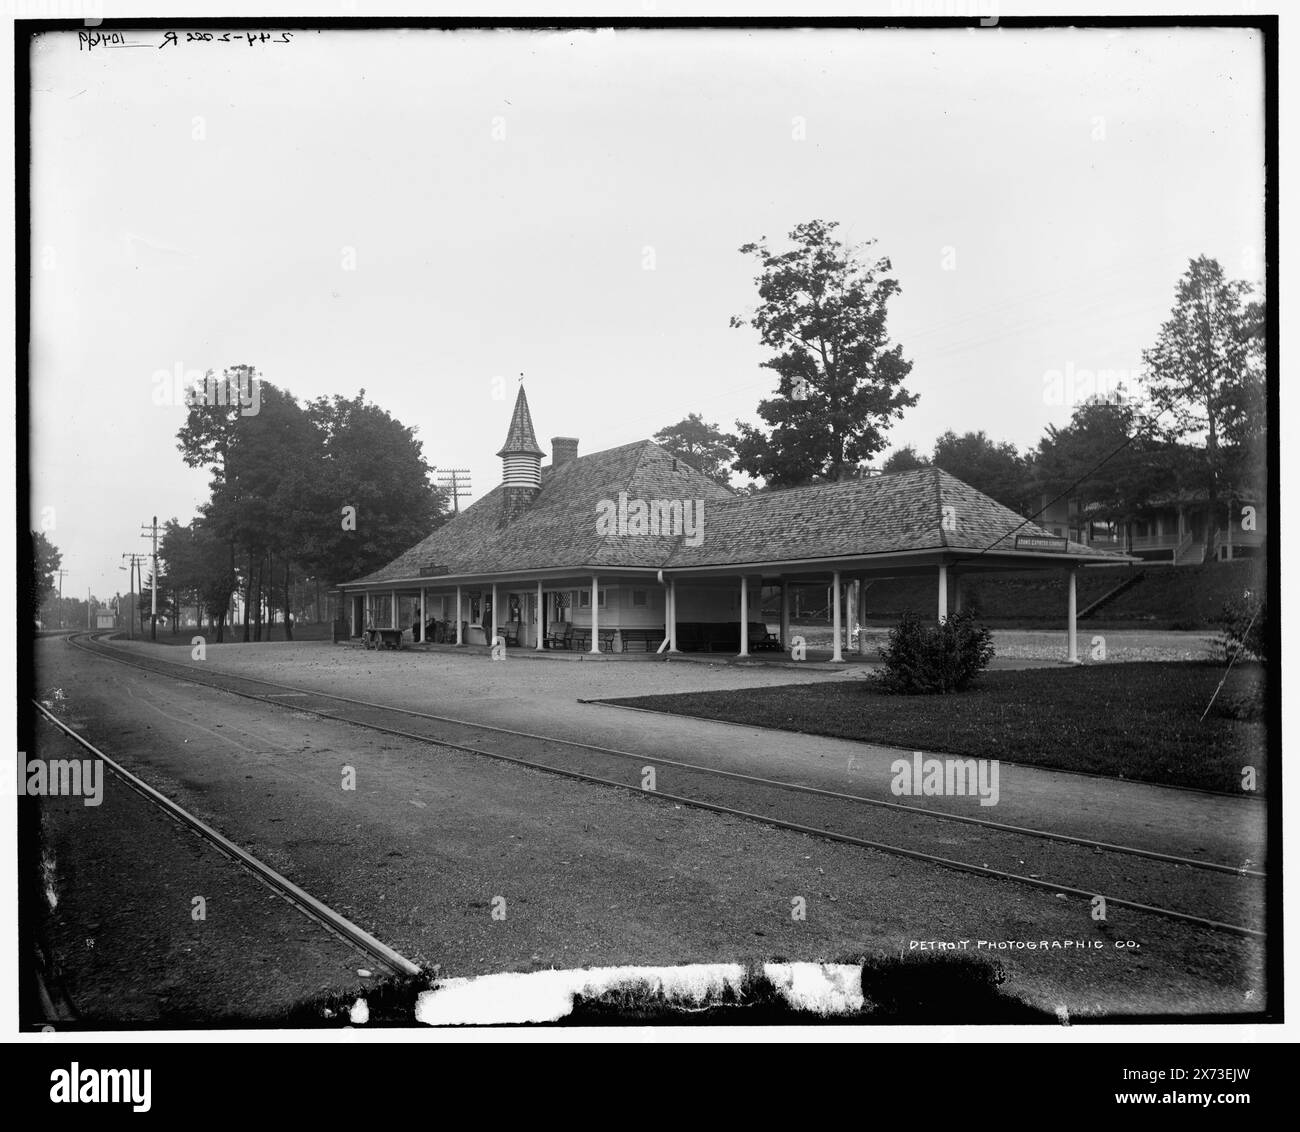 G.R. & I. Station at Bay View, Mich., Date based on Detroit, Catalogue J (1901)., Videodisc images are out of sequence; actual left to right order is 06099, 06098., '243-2 sec L' and '244-2 sec R' on negatives., Detroit Publishing Co. no. 010469., Gift; State Historical Society of Colorado; 1949,  Grand Rapids & Indiana Railway. , Railroads. , Railroad stations. , United States, Michigan, Bay View. Stock Photo